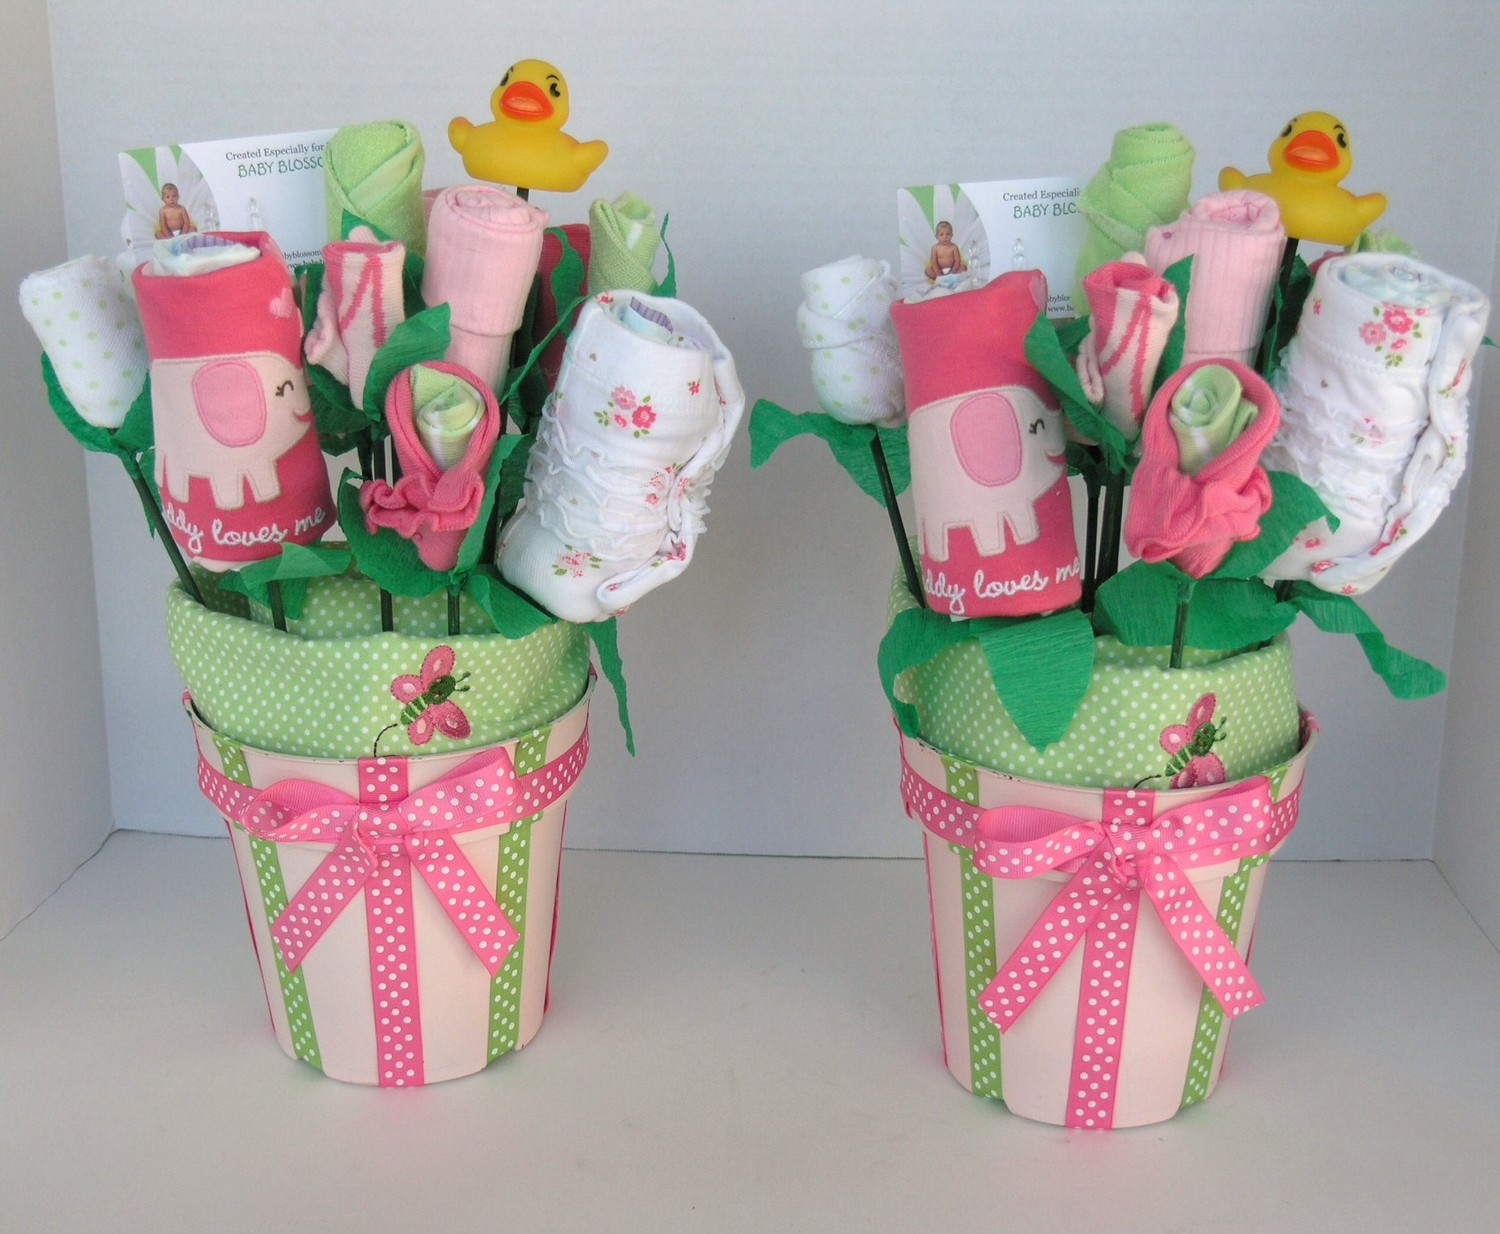 Cute Diy Baby Shower Gifts
 Five Best DIY Baby Gifting Ideas for The Little Special